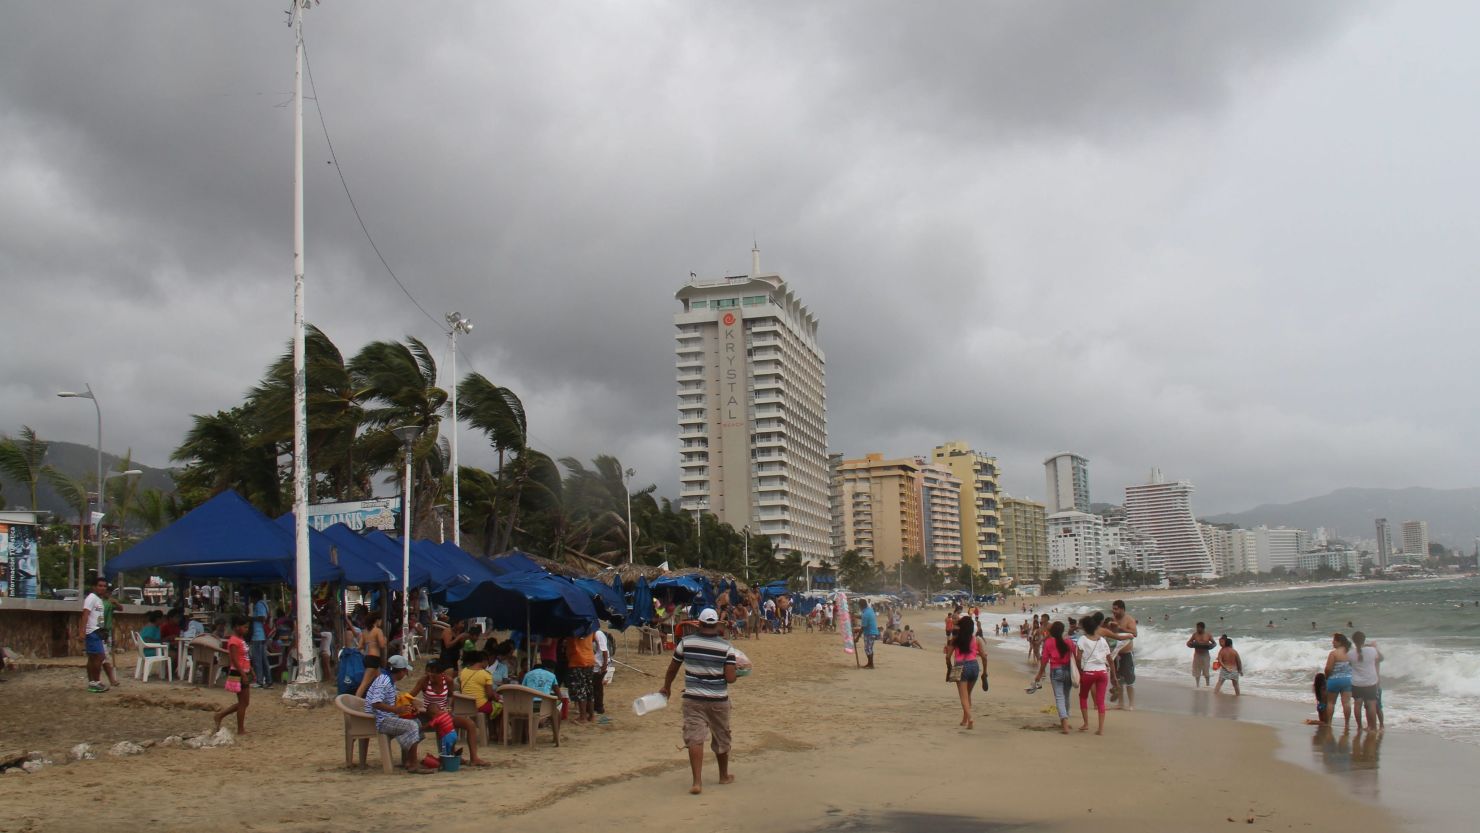 Tropical Storm Raymond brings cloudy skies to Acapulco, Mexico, on Sunday, before it strengthened to a hurricane.